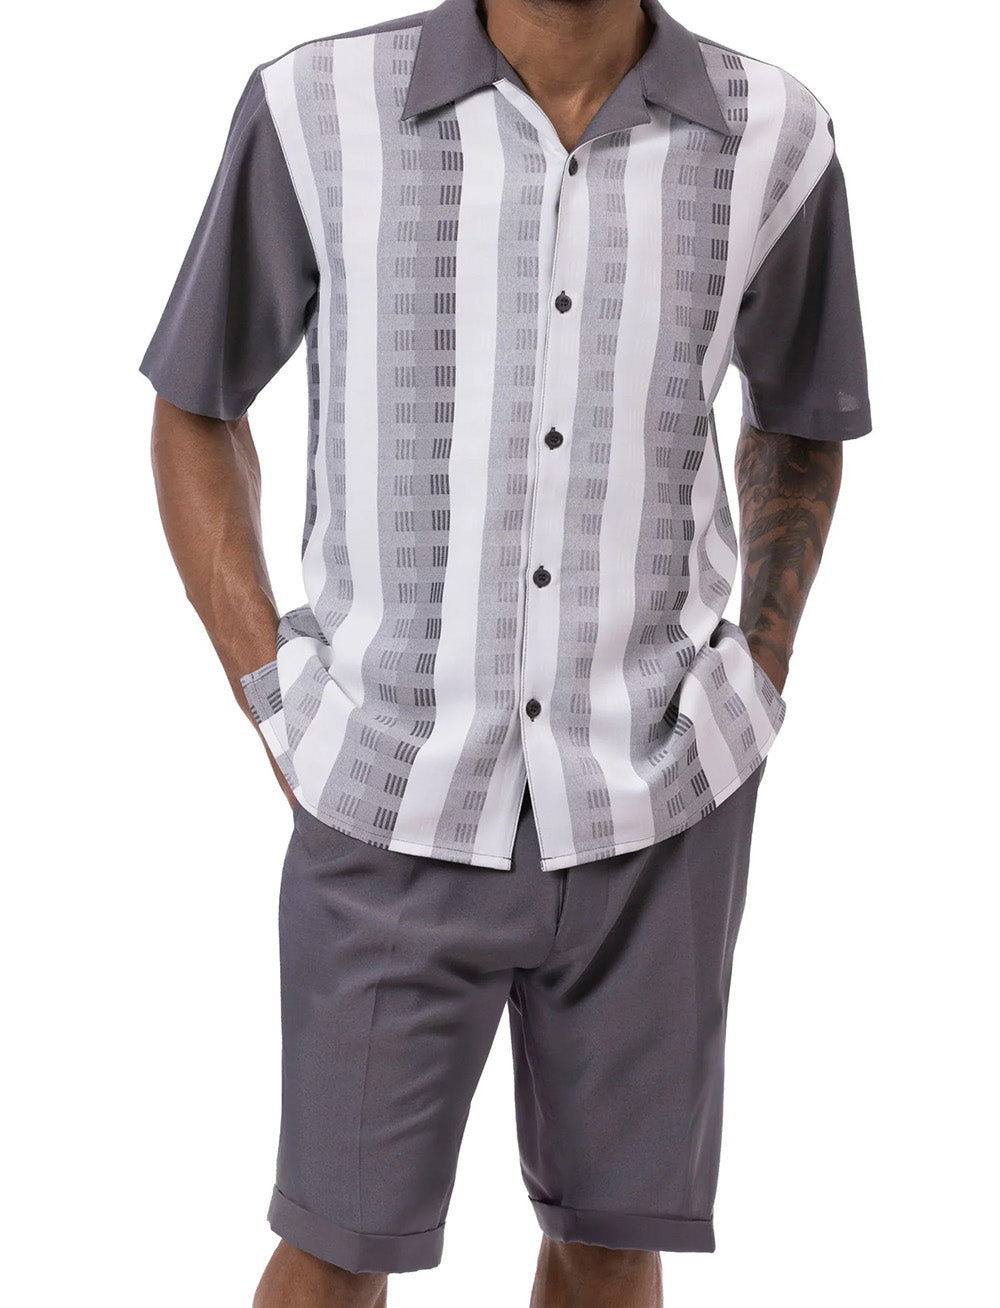 Gray Color Striped Walking Suit 2 Piece Short Sleeve Set with Shorts